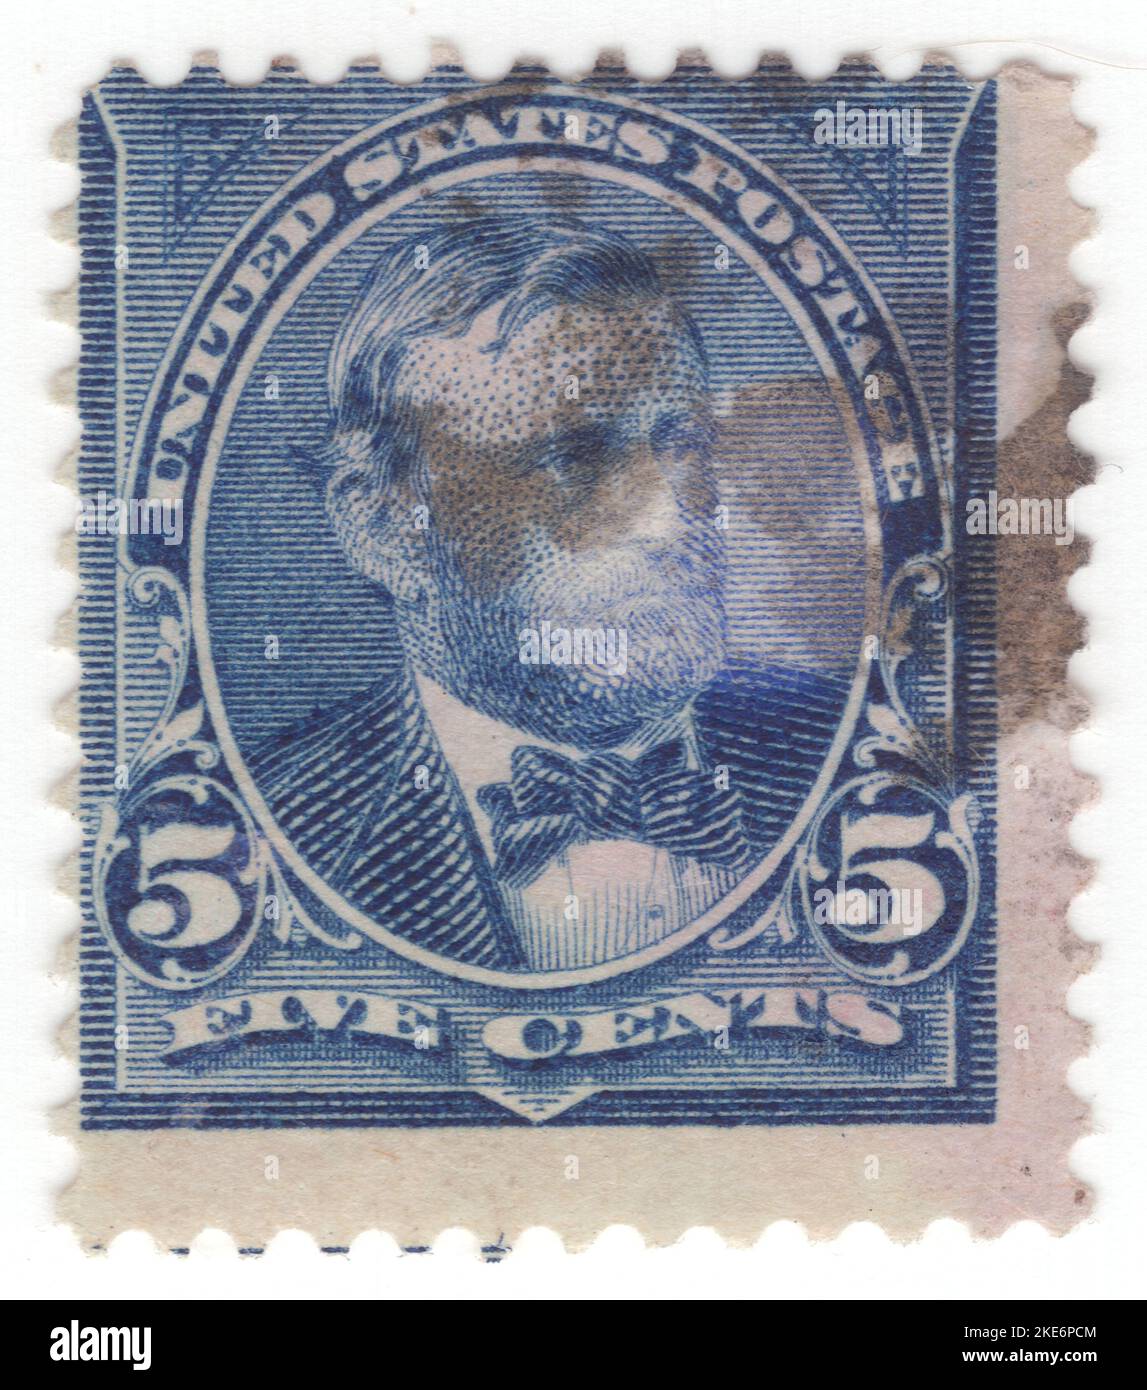 USA - 1898: An 5 cents dark blue postage stamp depicting portrait of Ulysses S. Grant (born Hiram Ulysses Grant), American military officer and politician who served as the 18th president of the United States from 1869 to 1877. As Commanding General, he led the Union Army to victory in the American Civil War in 1865 and thereafter briefly served as Secretary of War. Later, as president, Grant was an effective civil rights executive who signed the bill that created the Justice Department and worked with Radical Republicans to protect African Americans during Reconstruction Stock Photo